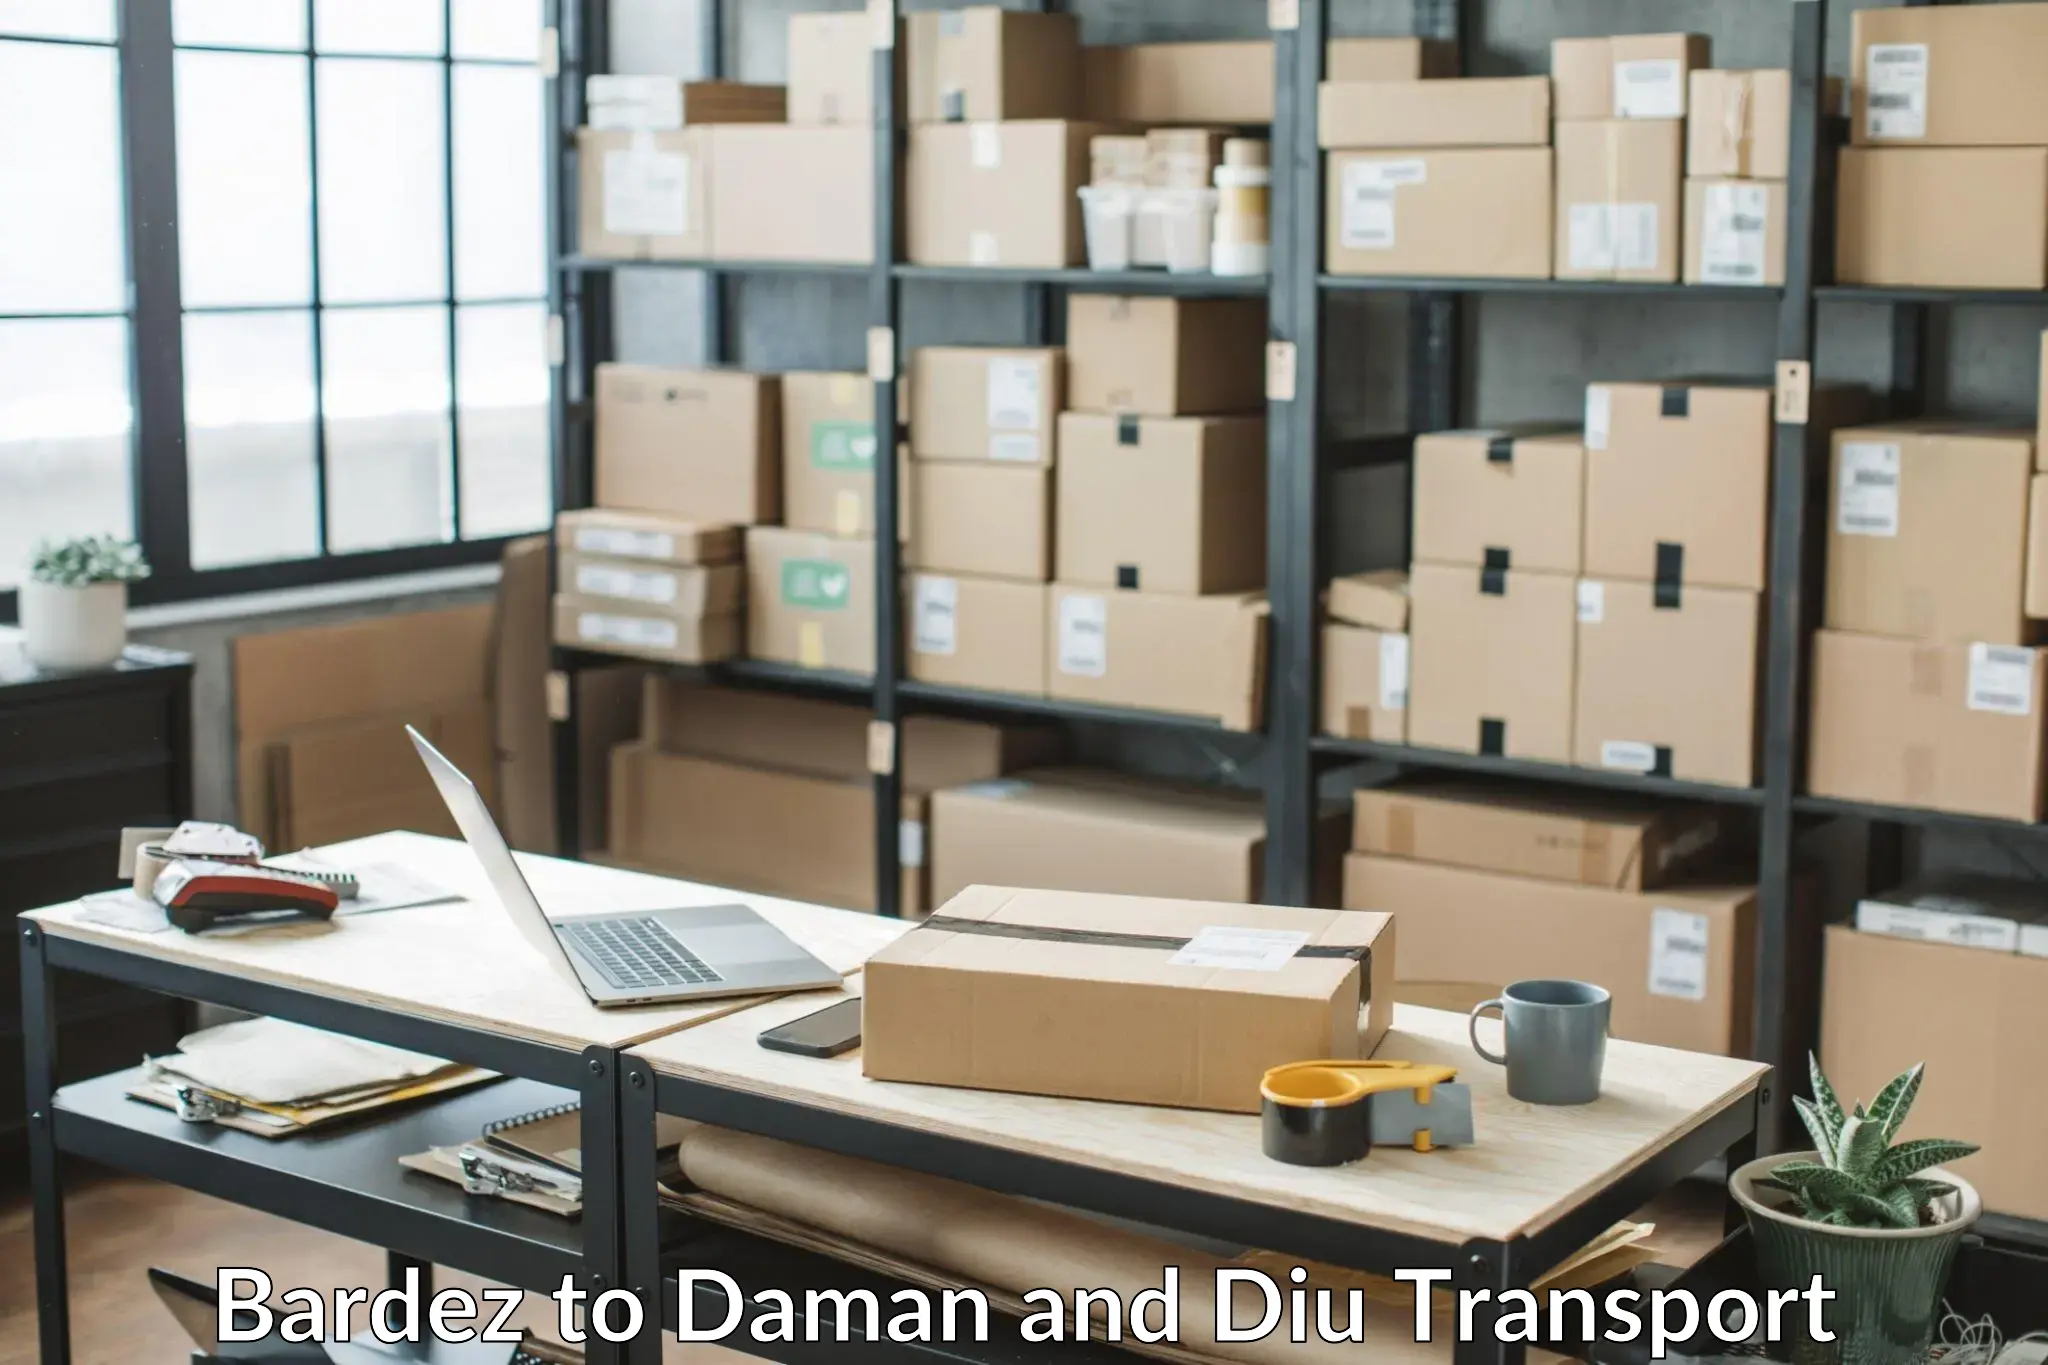 Package delivery services Bardez to Daman